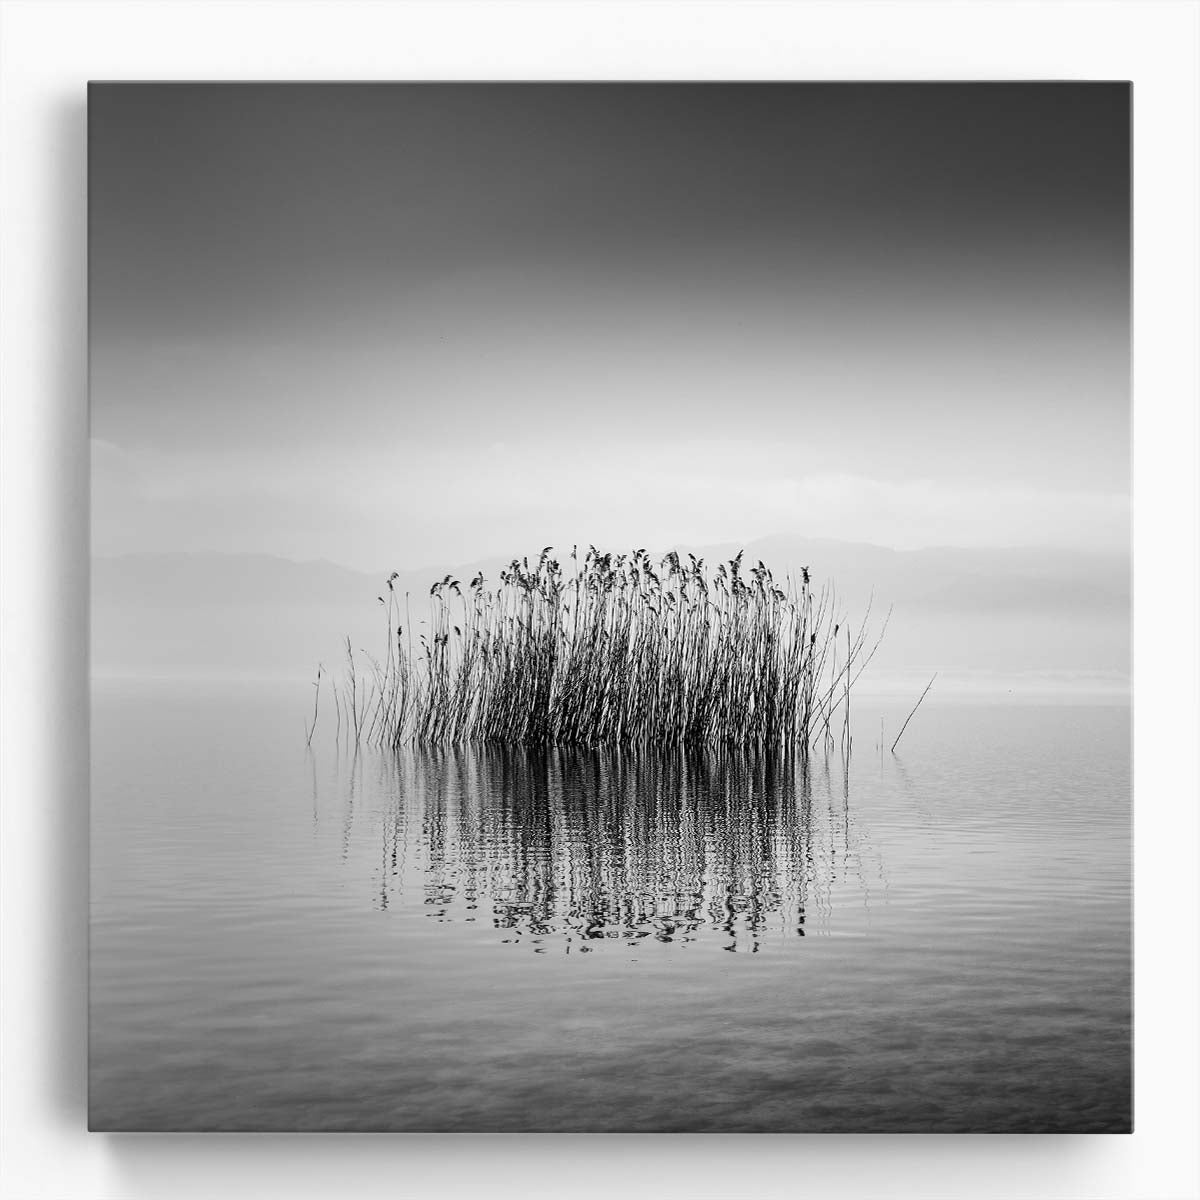 Foggy Lake Volvi, Greece Minimalist Landscape Photography Wall Art by Luxuriance Designs. Made in USA.